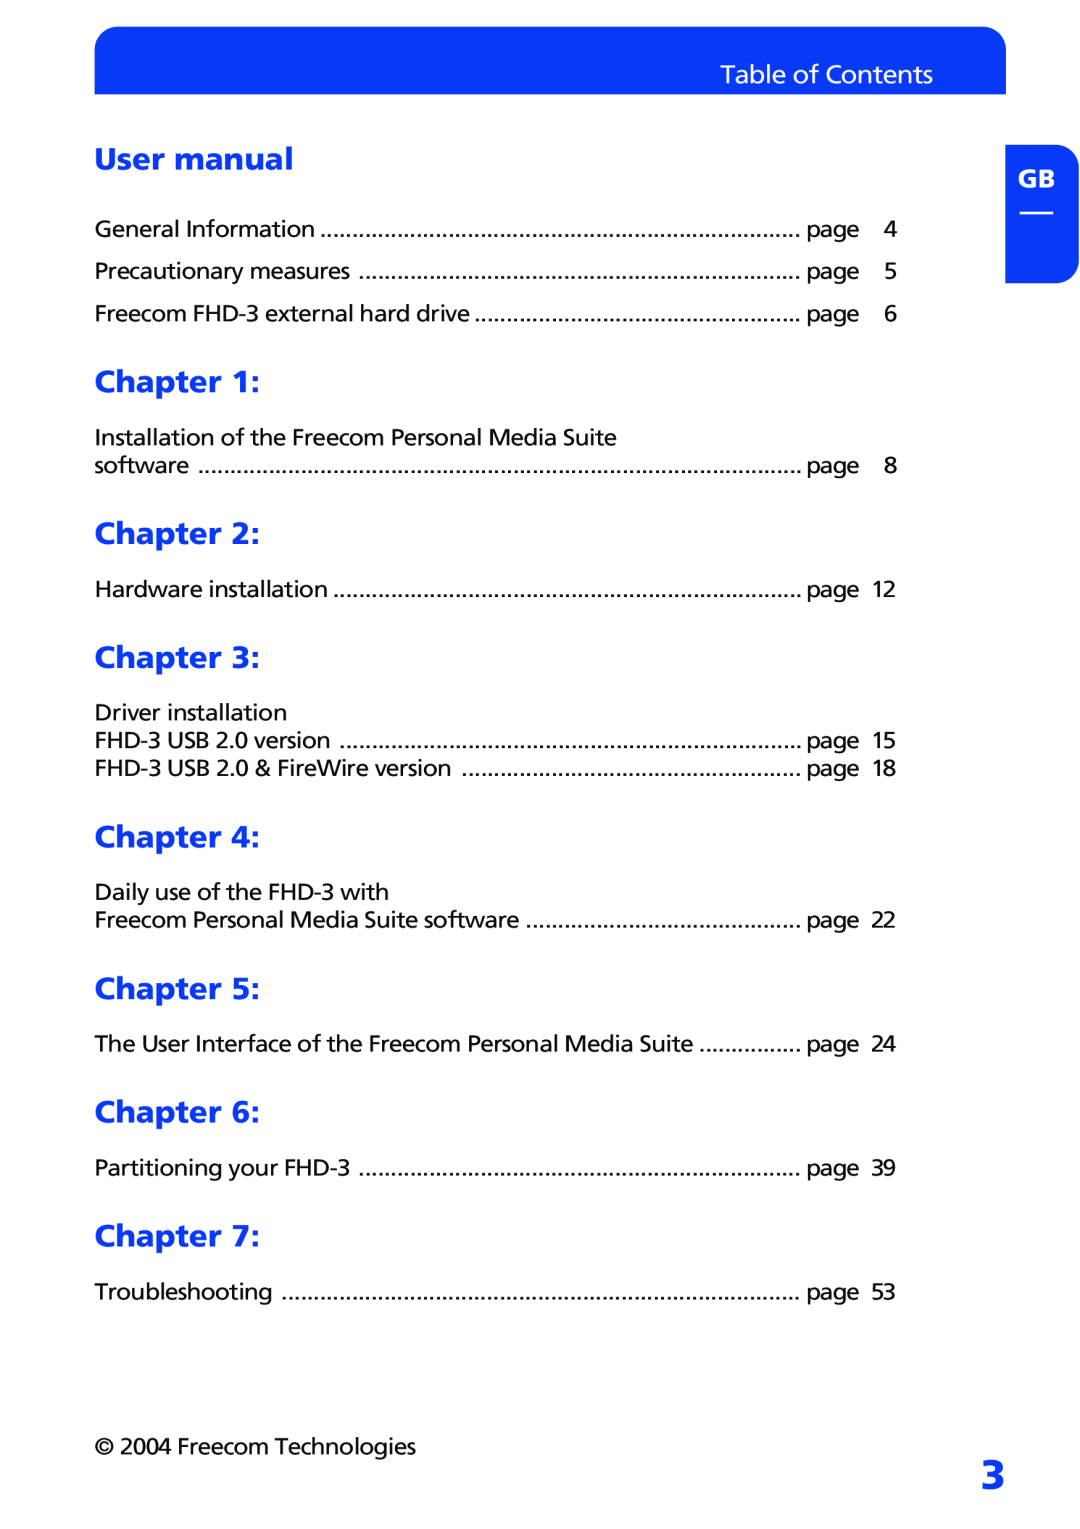 Freecom Technologies FHD-3 User manual, Chapter, Table of Contents 